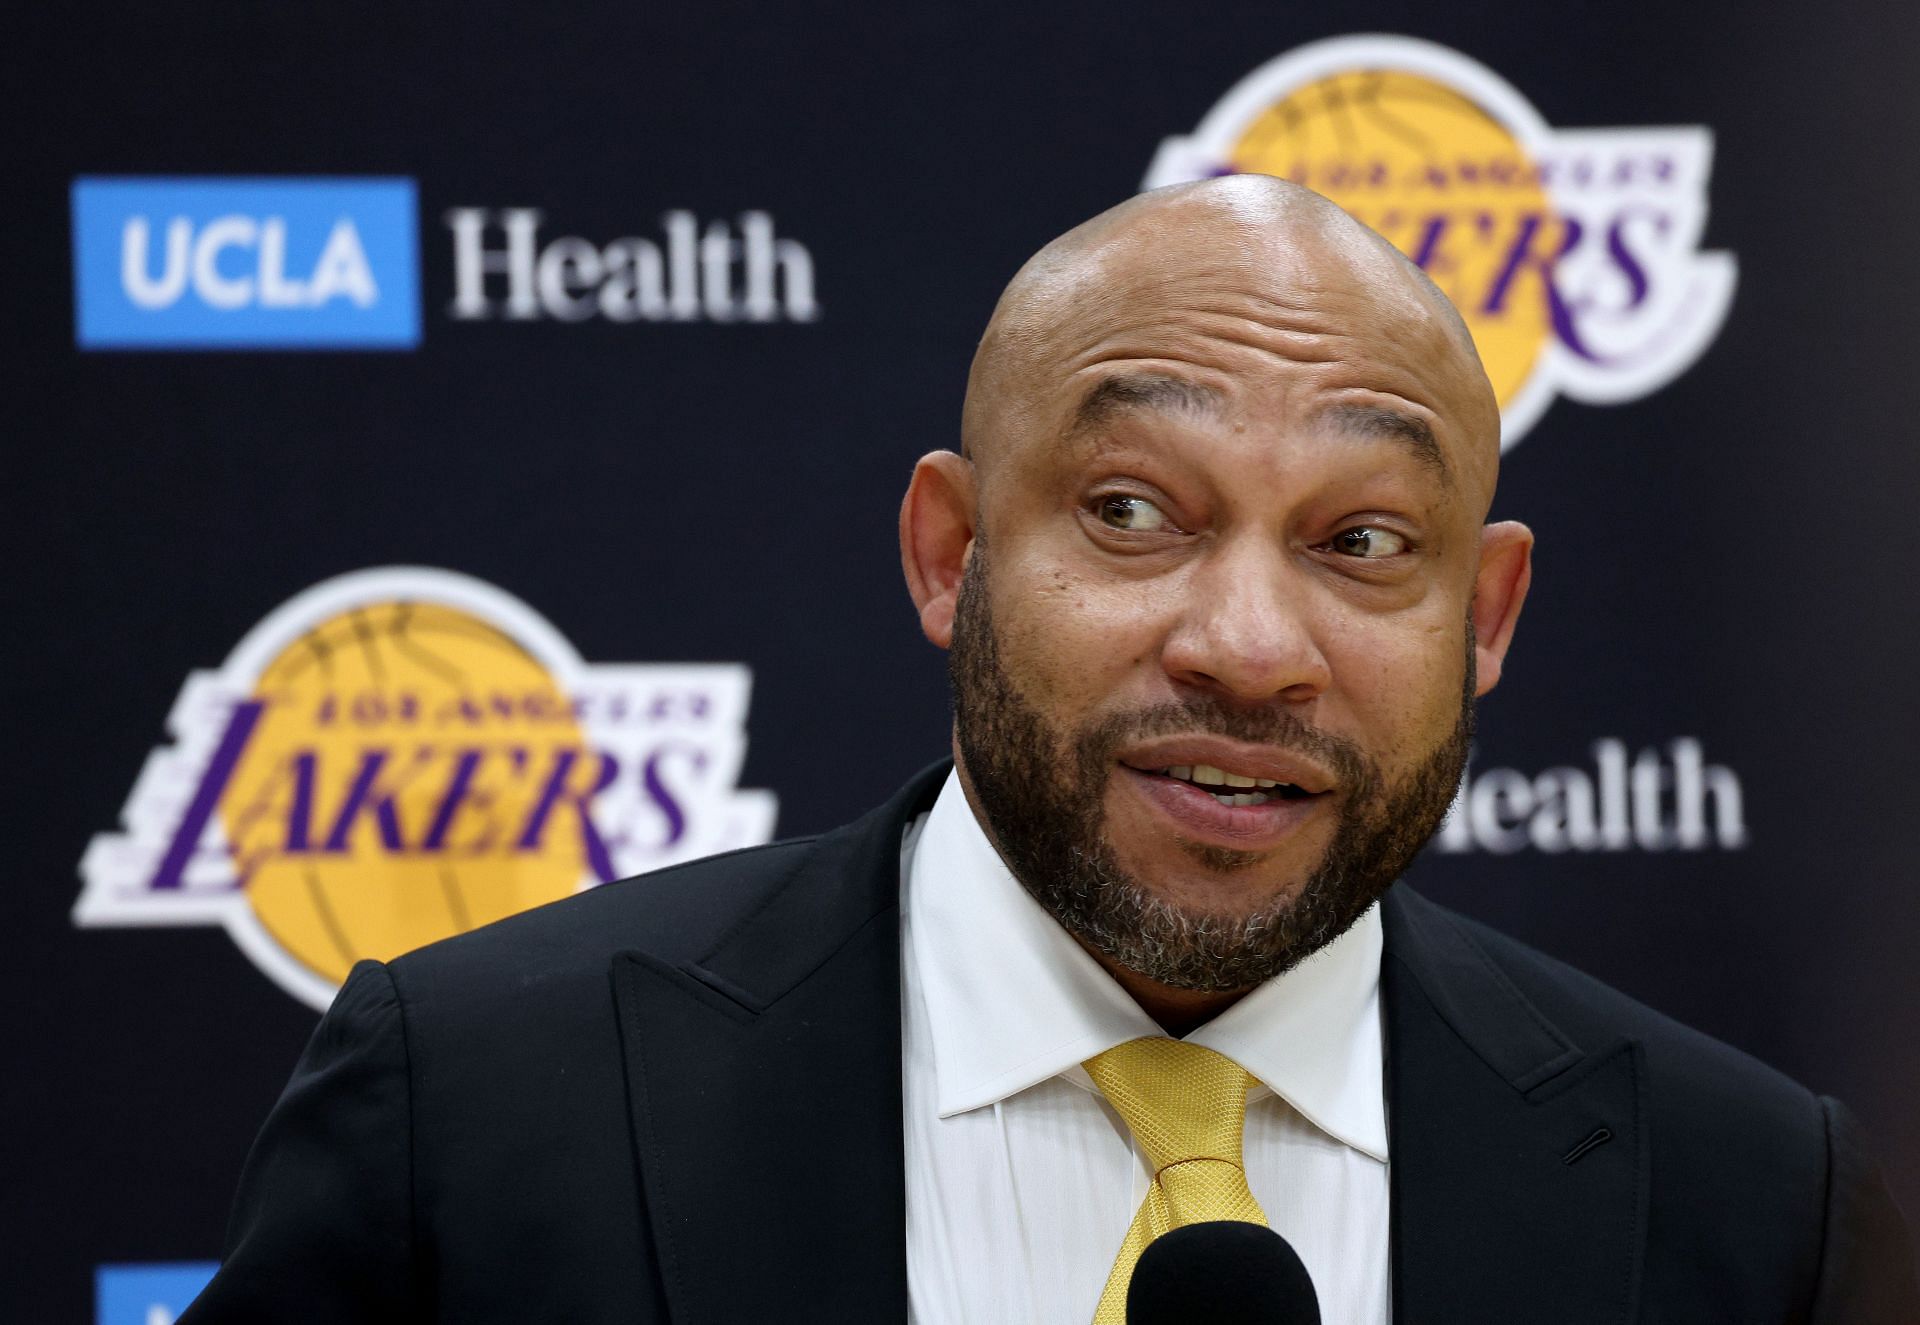 The Los Angeles Lakers introduce Darvin Ham as their coach.